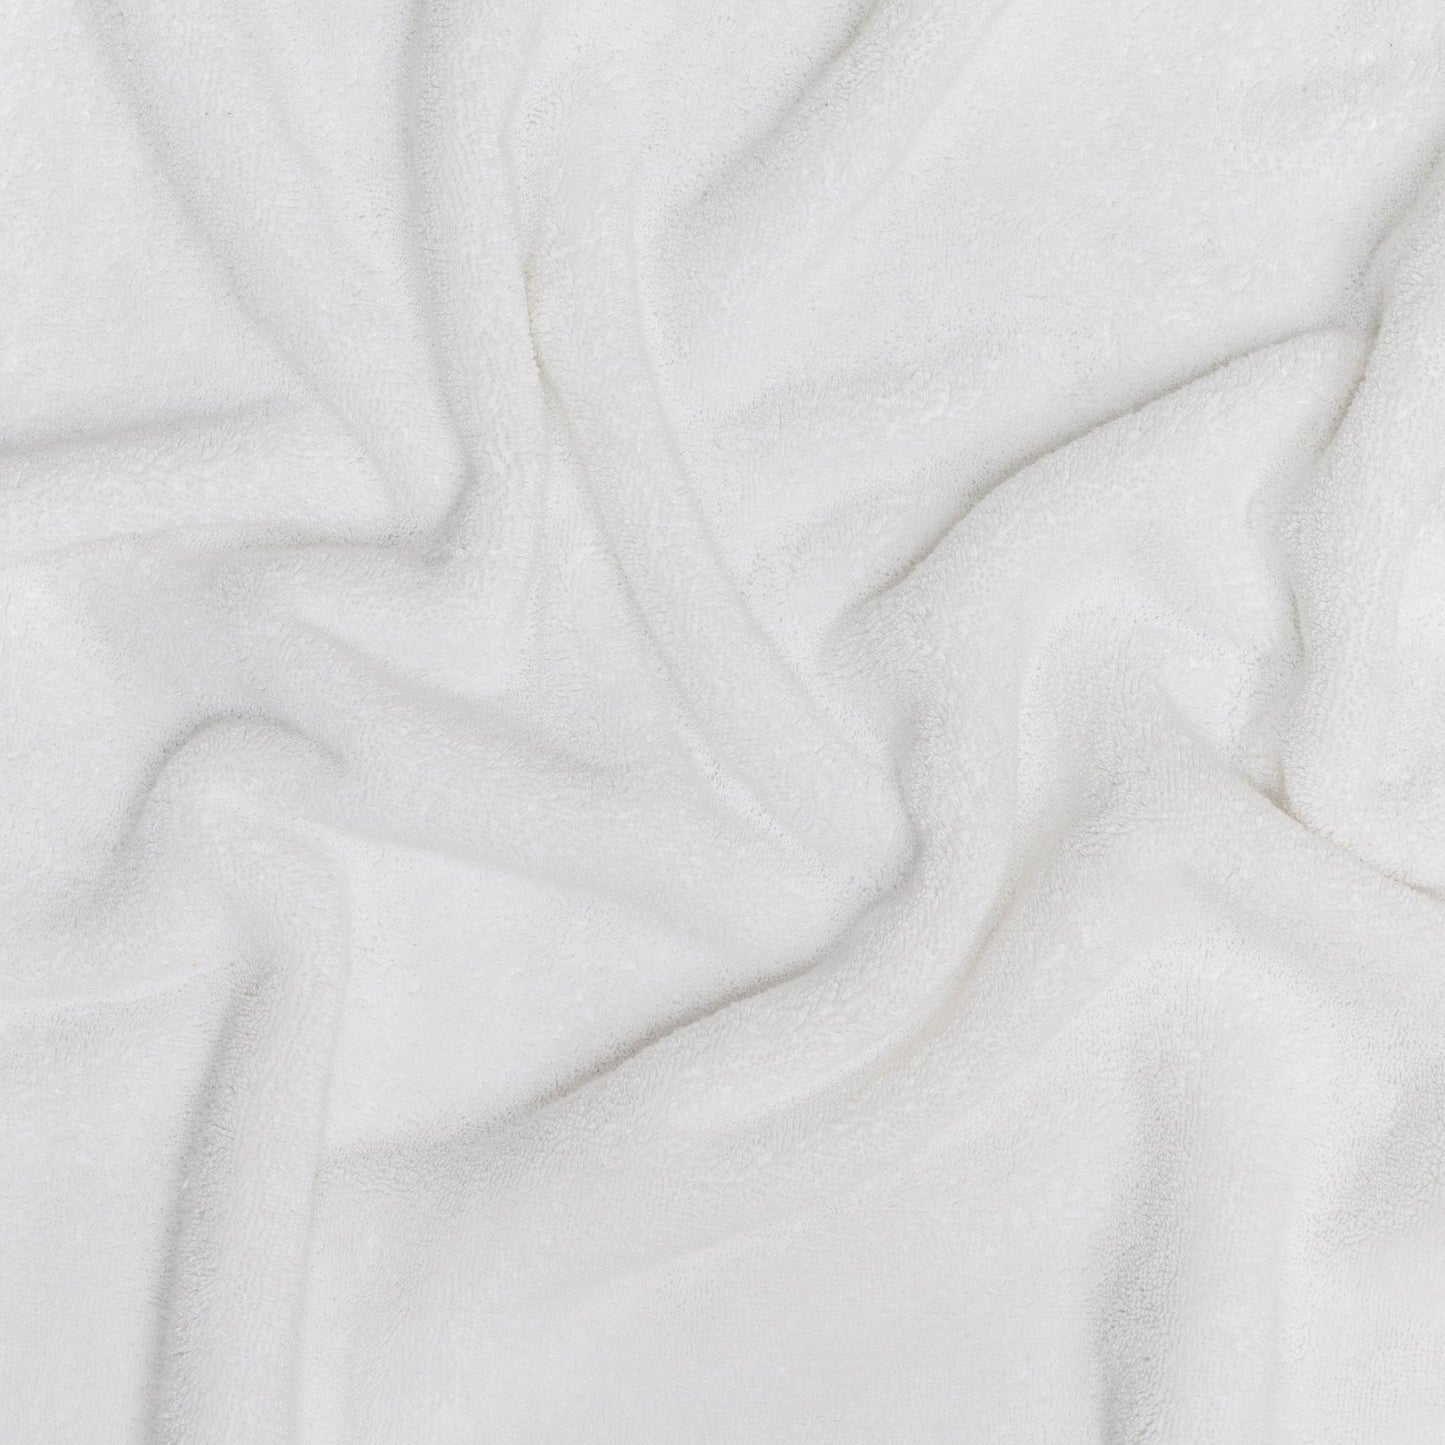 Close up with white Turkish towel texture